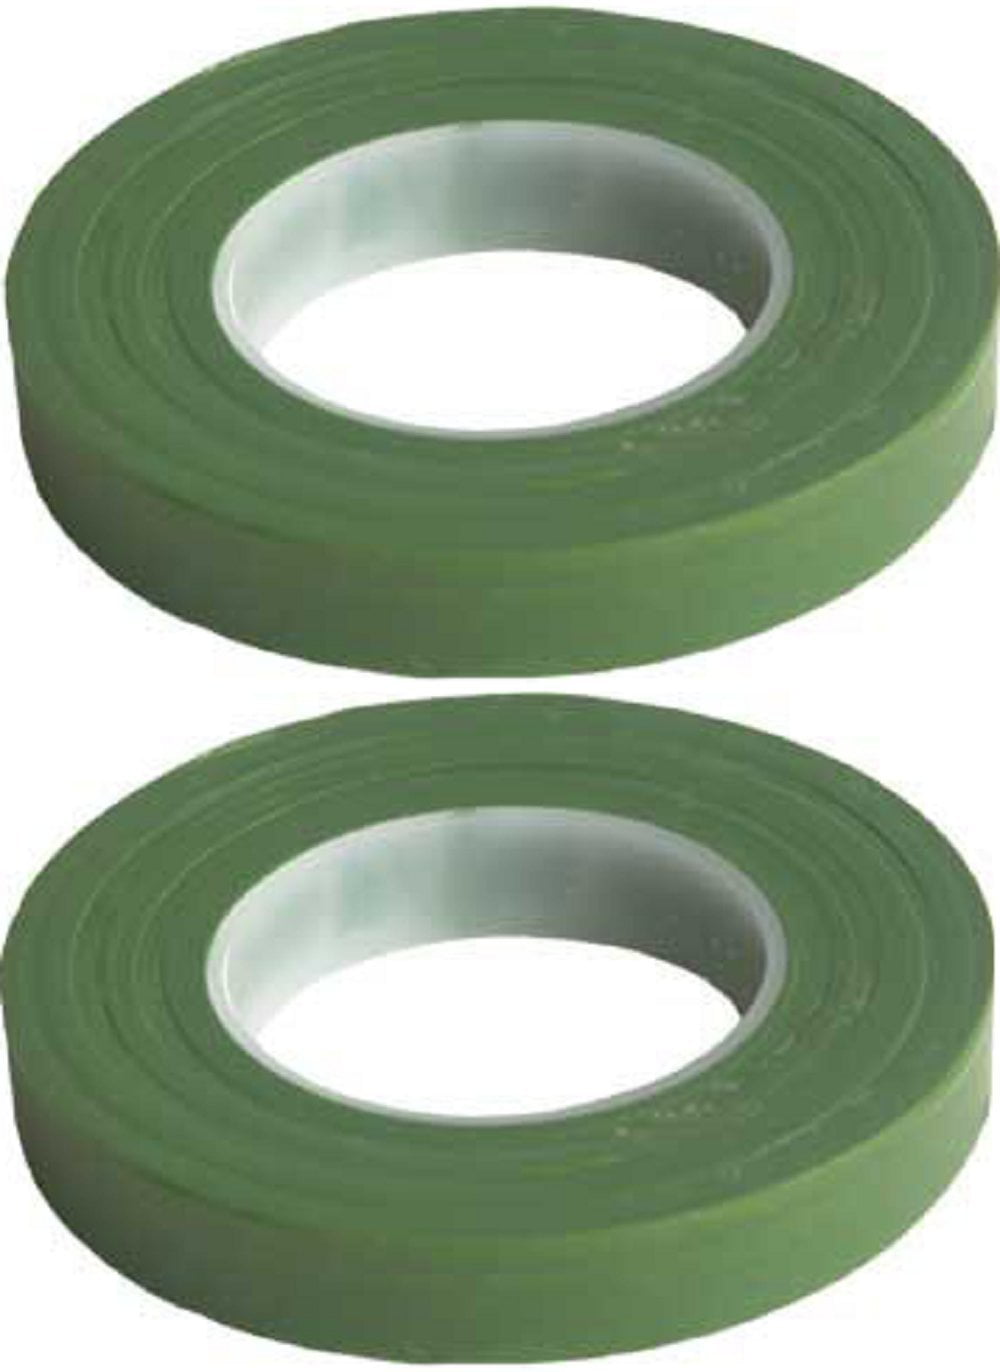 DECORA 1/2 Wide 4 Rolls Green Floral Stem Wrap Tapes for Bouquets and Brooch